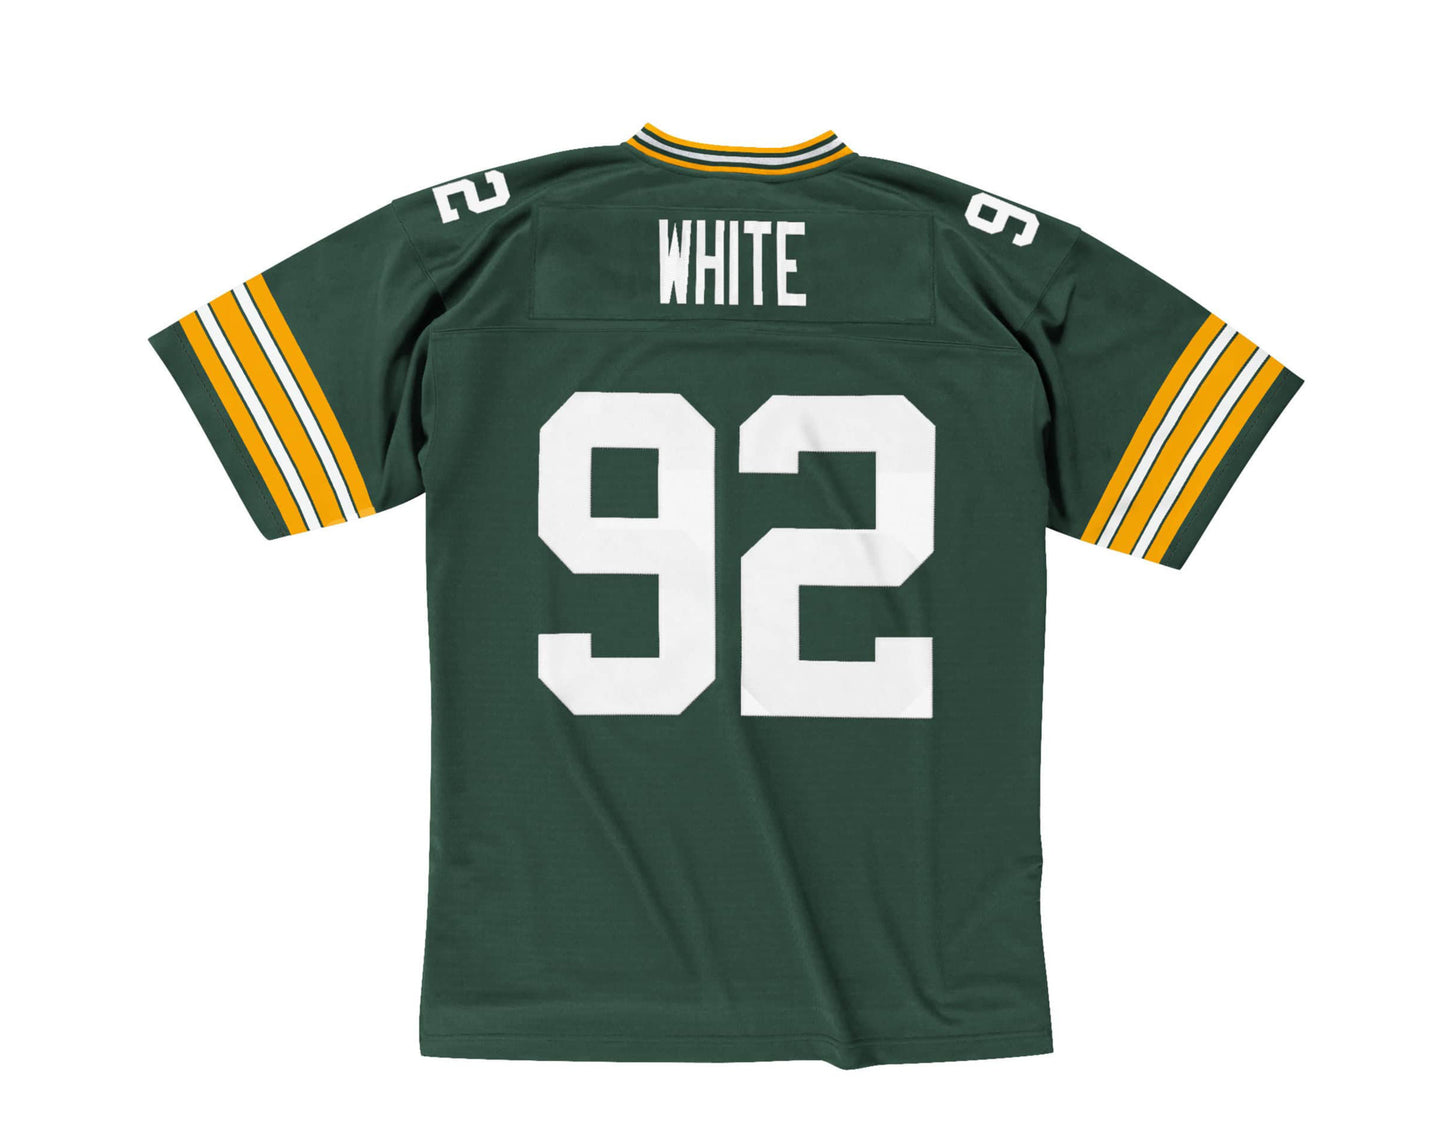 Mitchell & Ness Legacy Green Bay Packers 1996 Reggie White Jersey